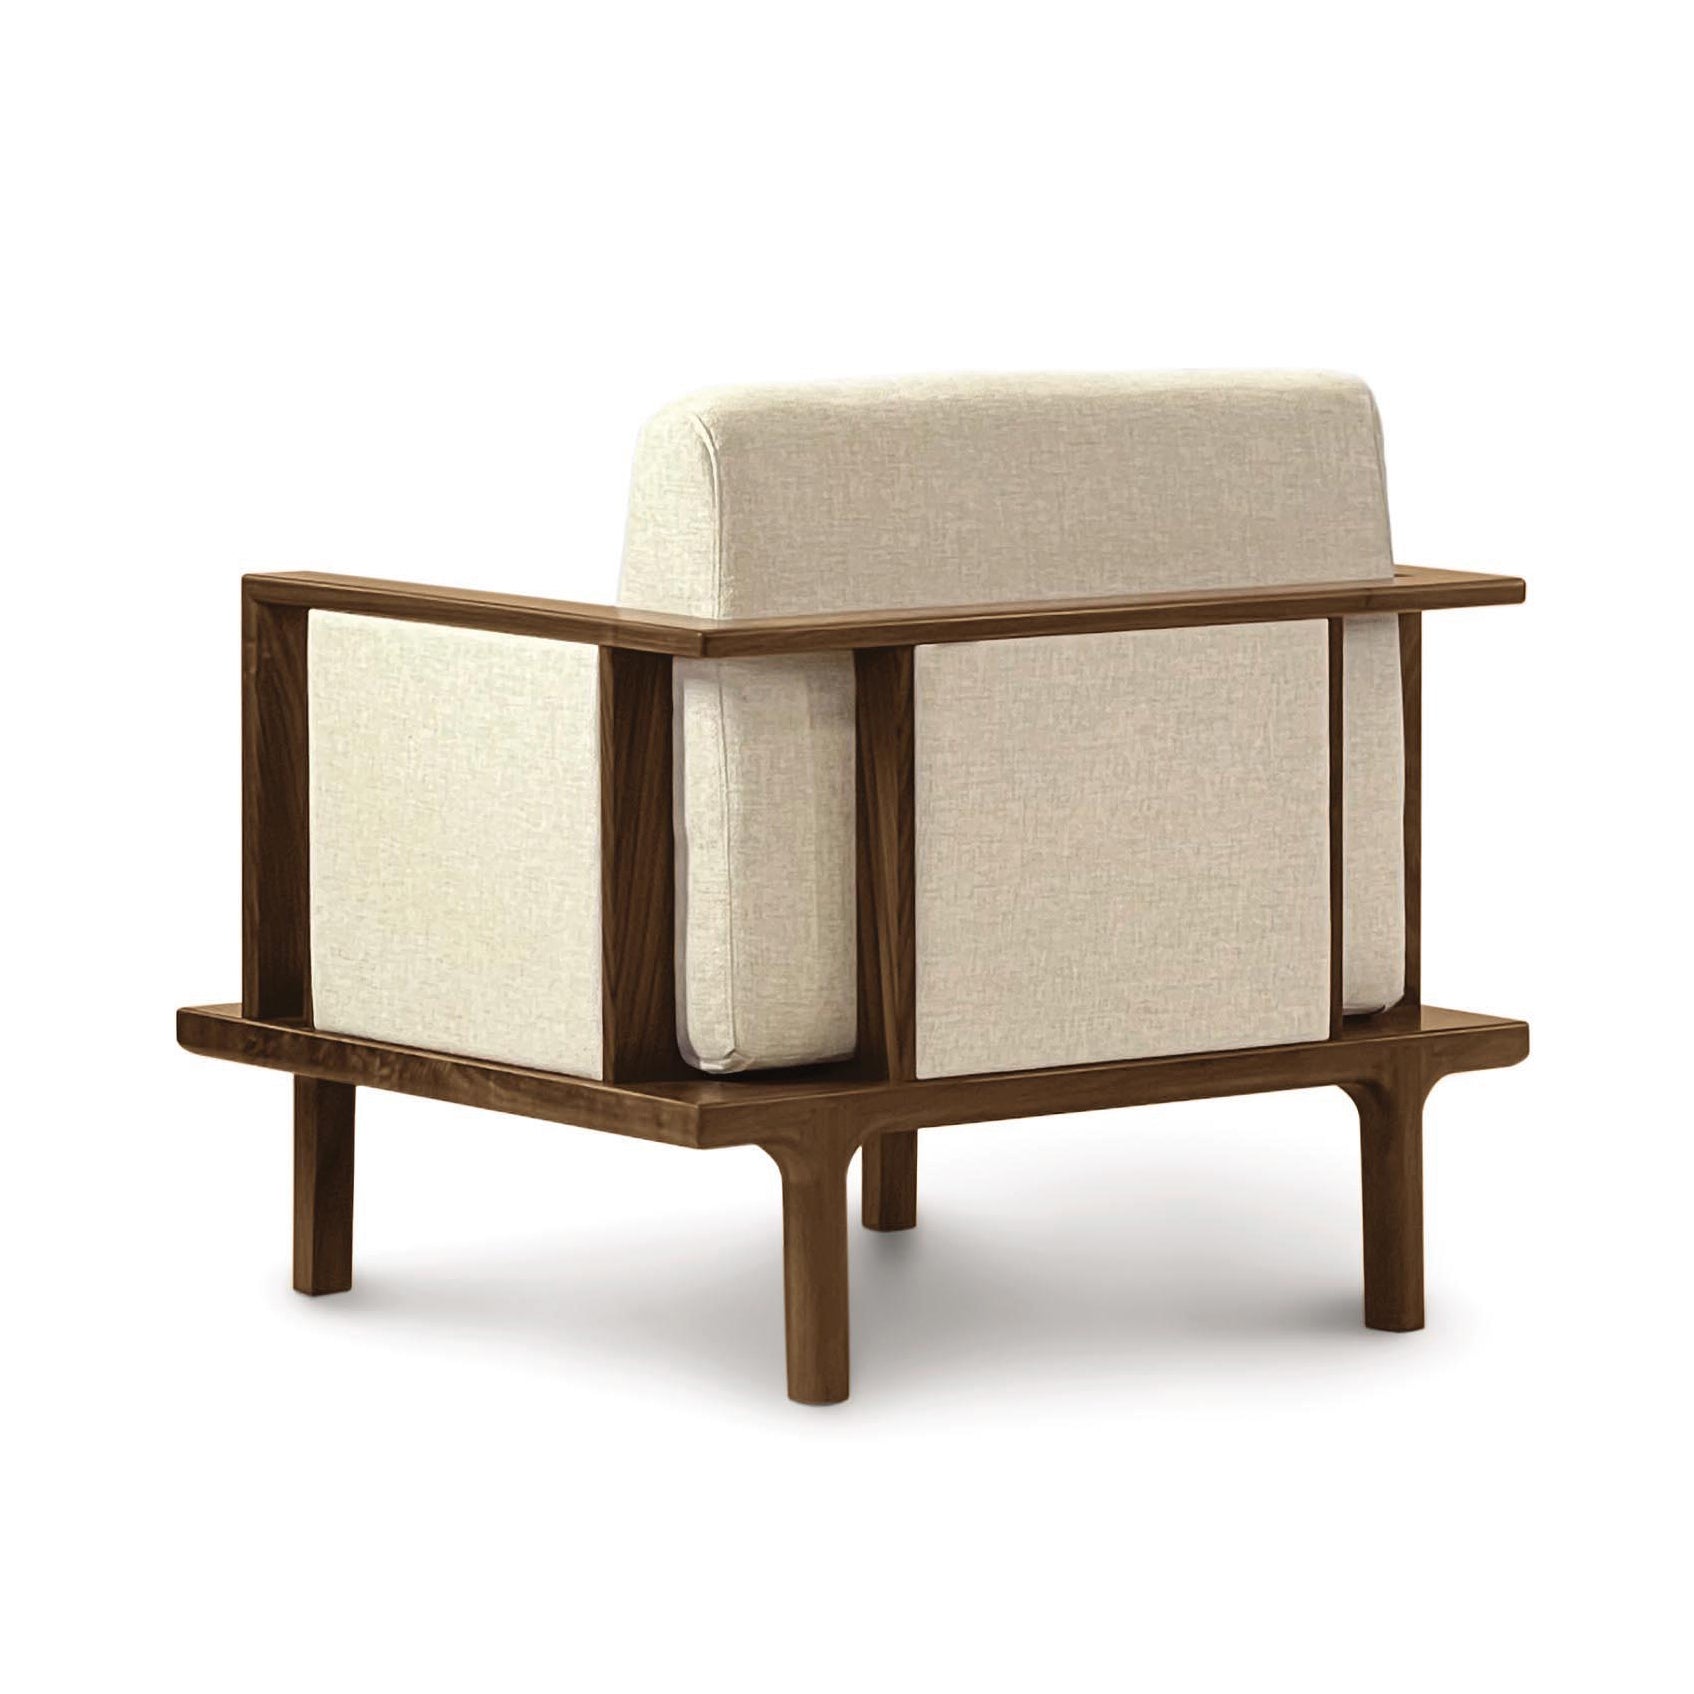 The Sierra Walnut Upholstered Chair with Upholstered Panels by Copeland Furniture features a modern design with a wooden frame and beige fabric upholstered panels.